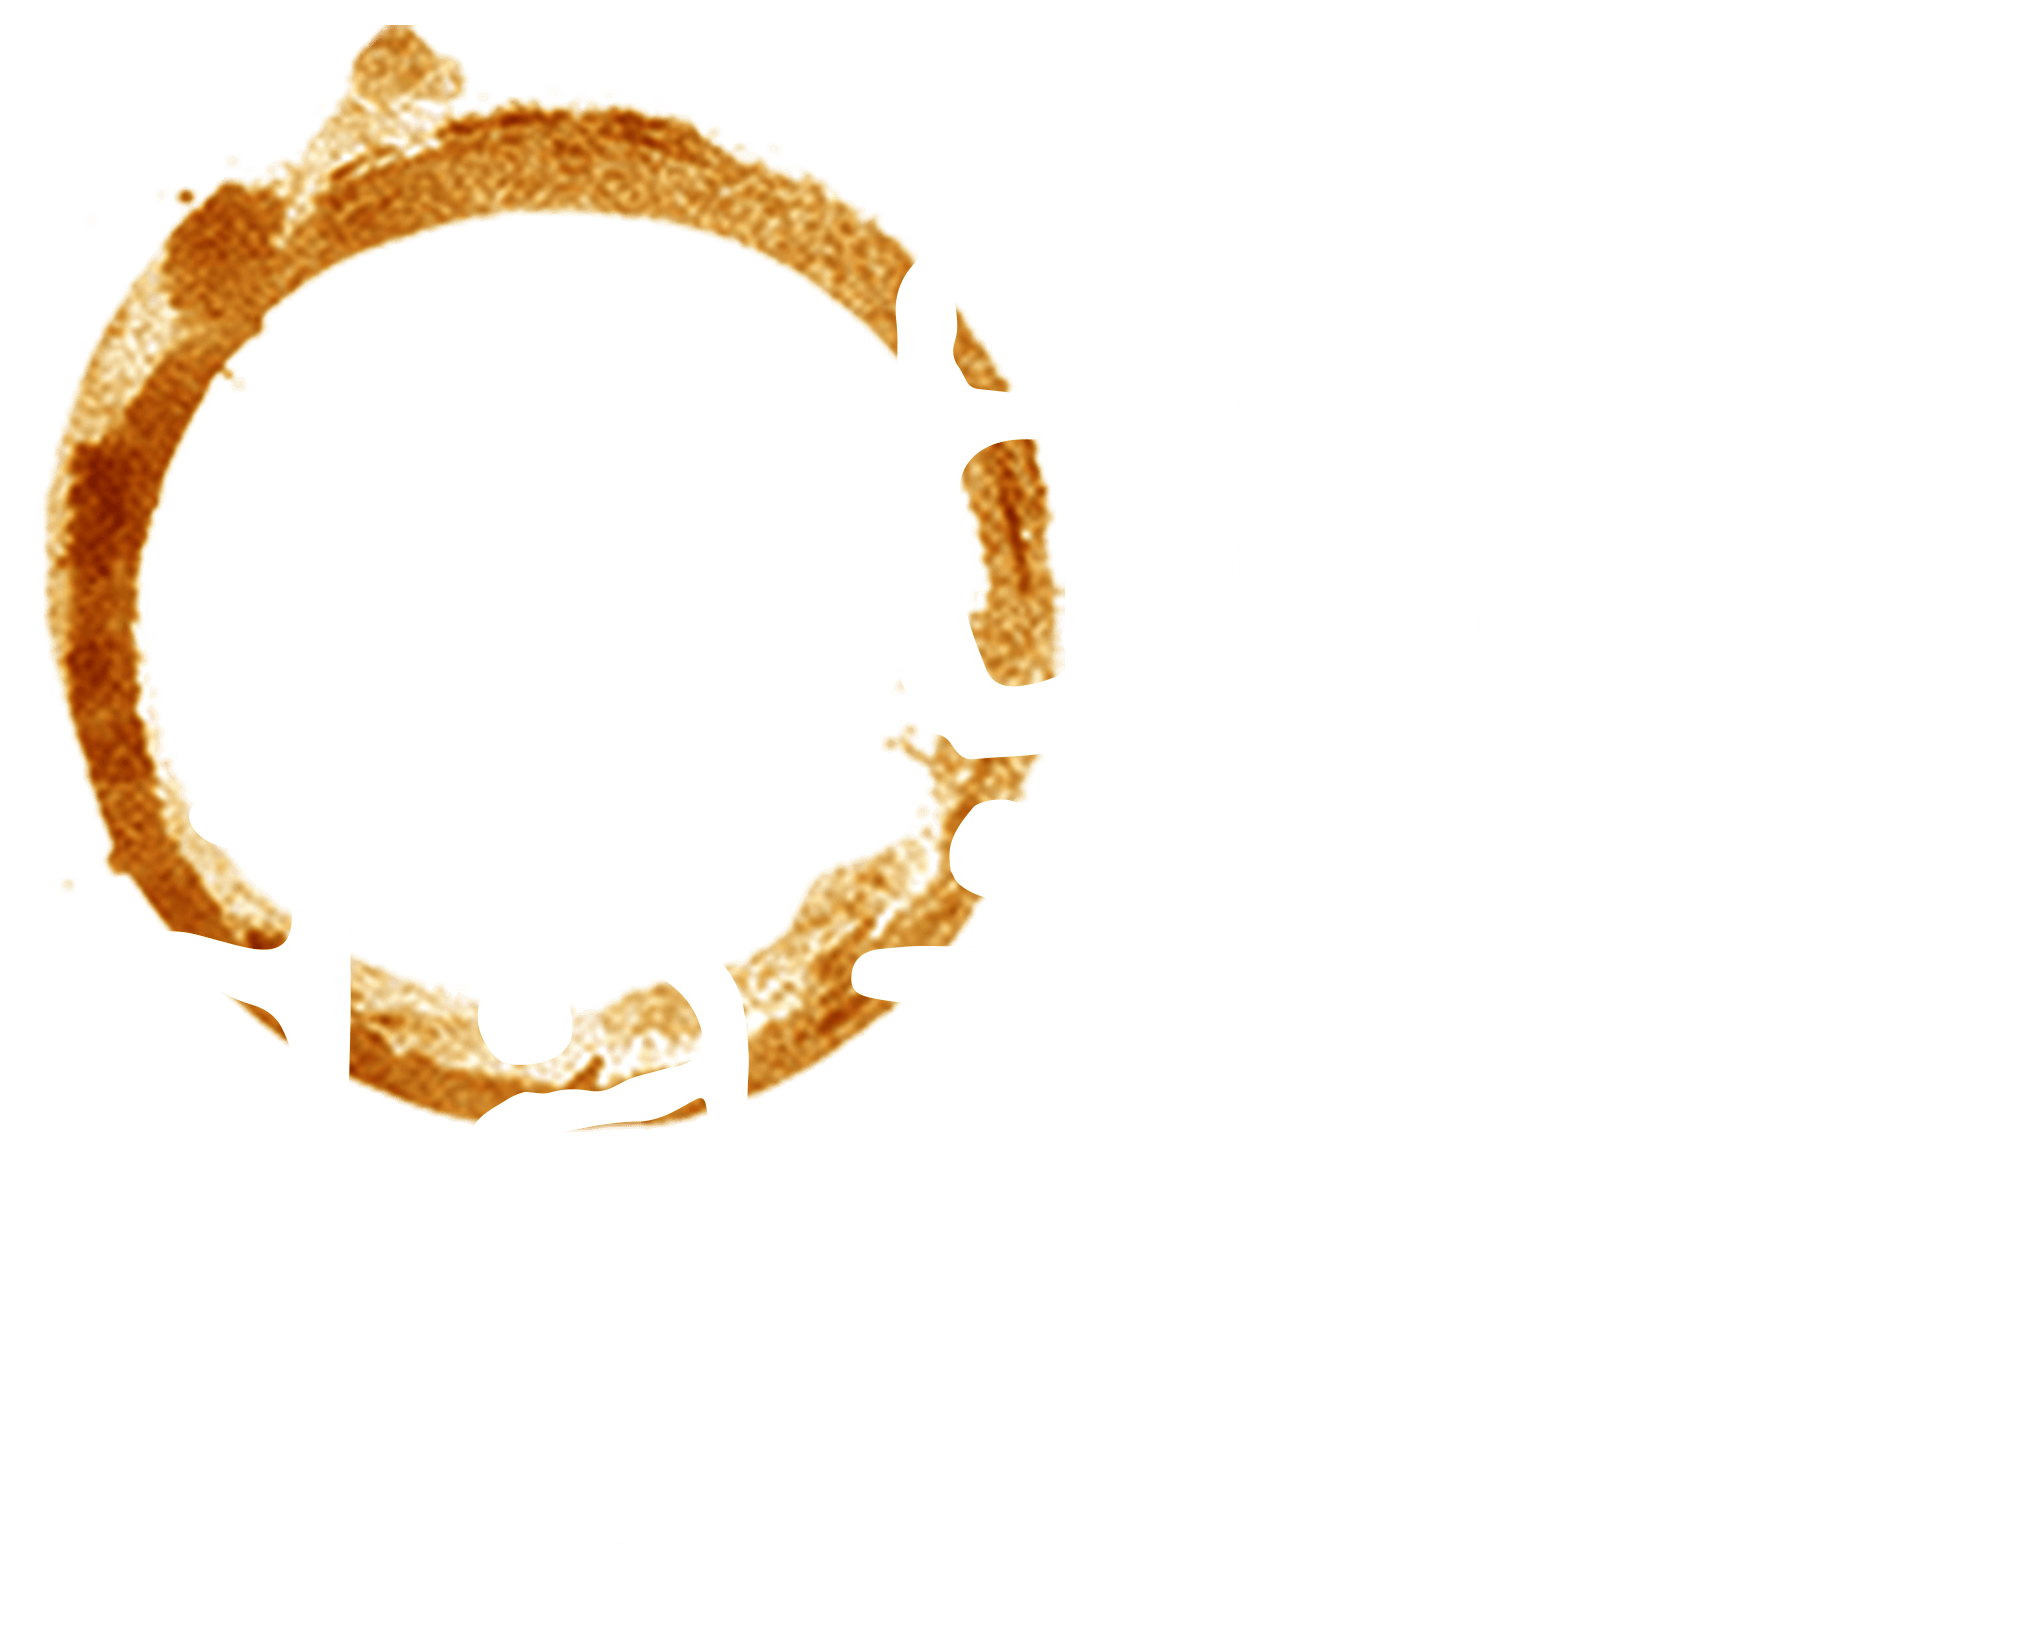 All Cafe Logo - Welcome Daily Coffee Cafe